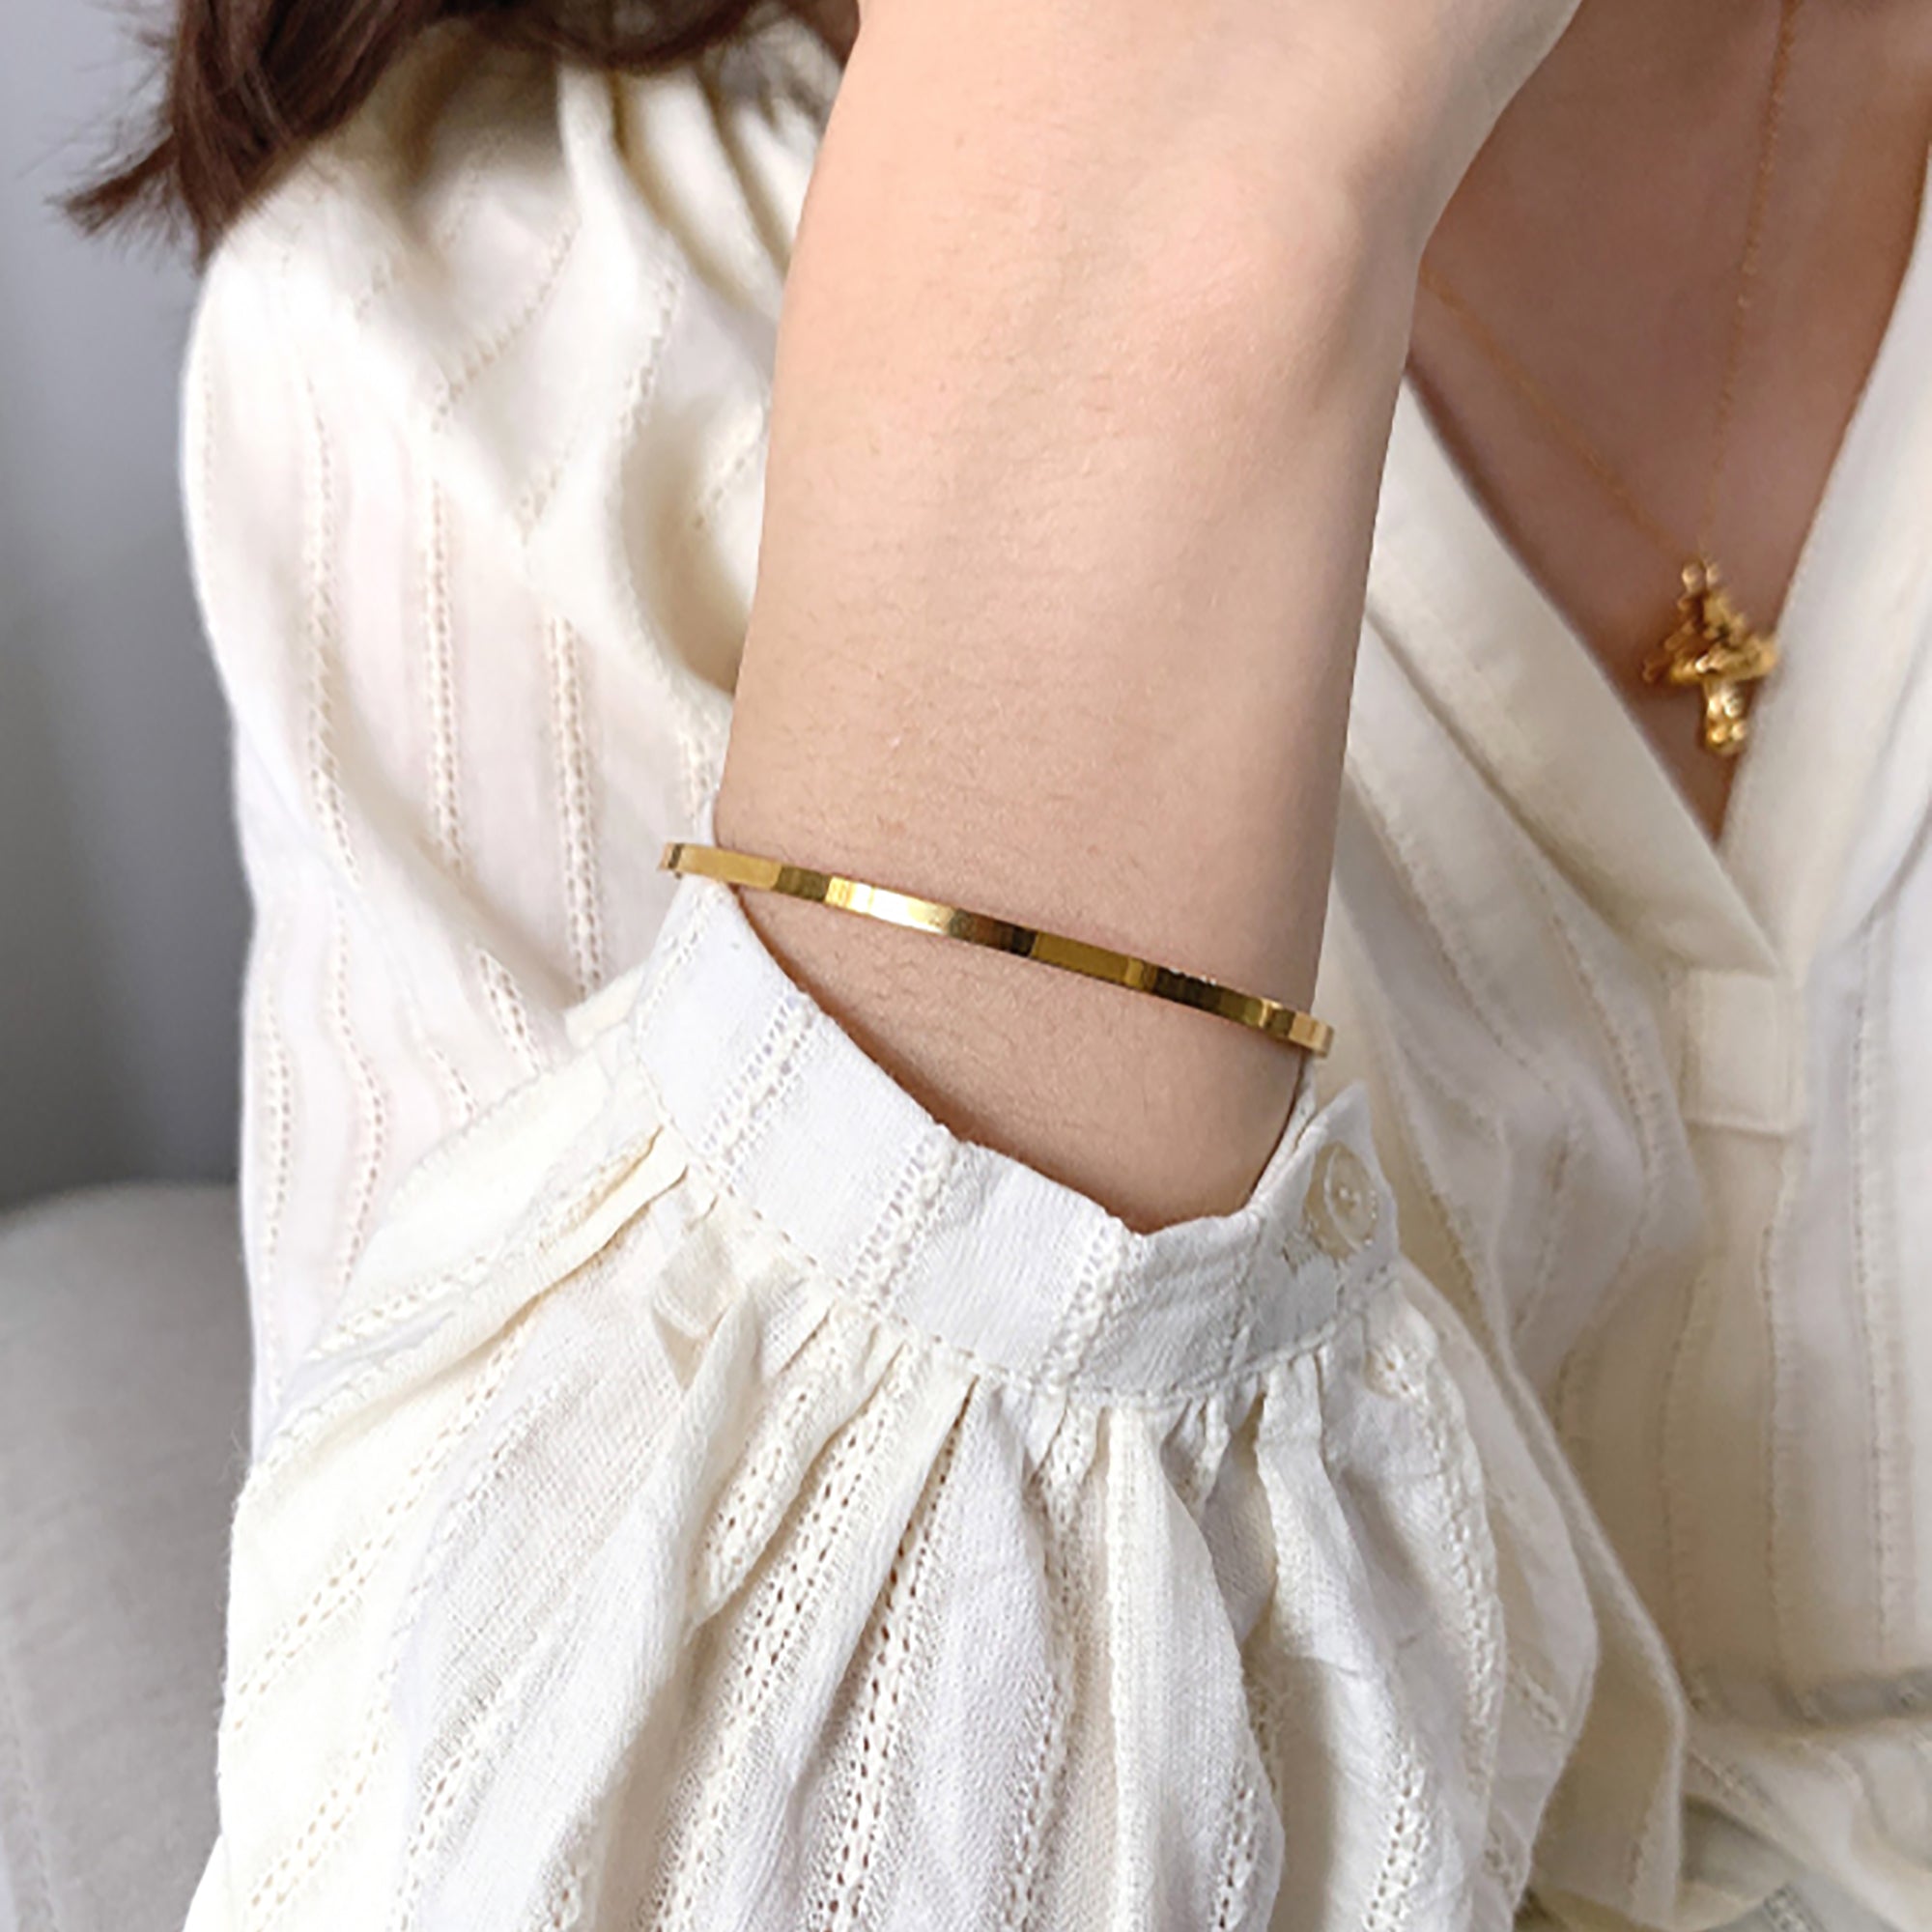 2 in 1 18K Gold Plated Simple Bangle Bracelet Valentine Day Gift Mother's Day